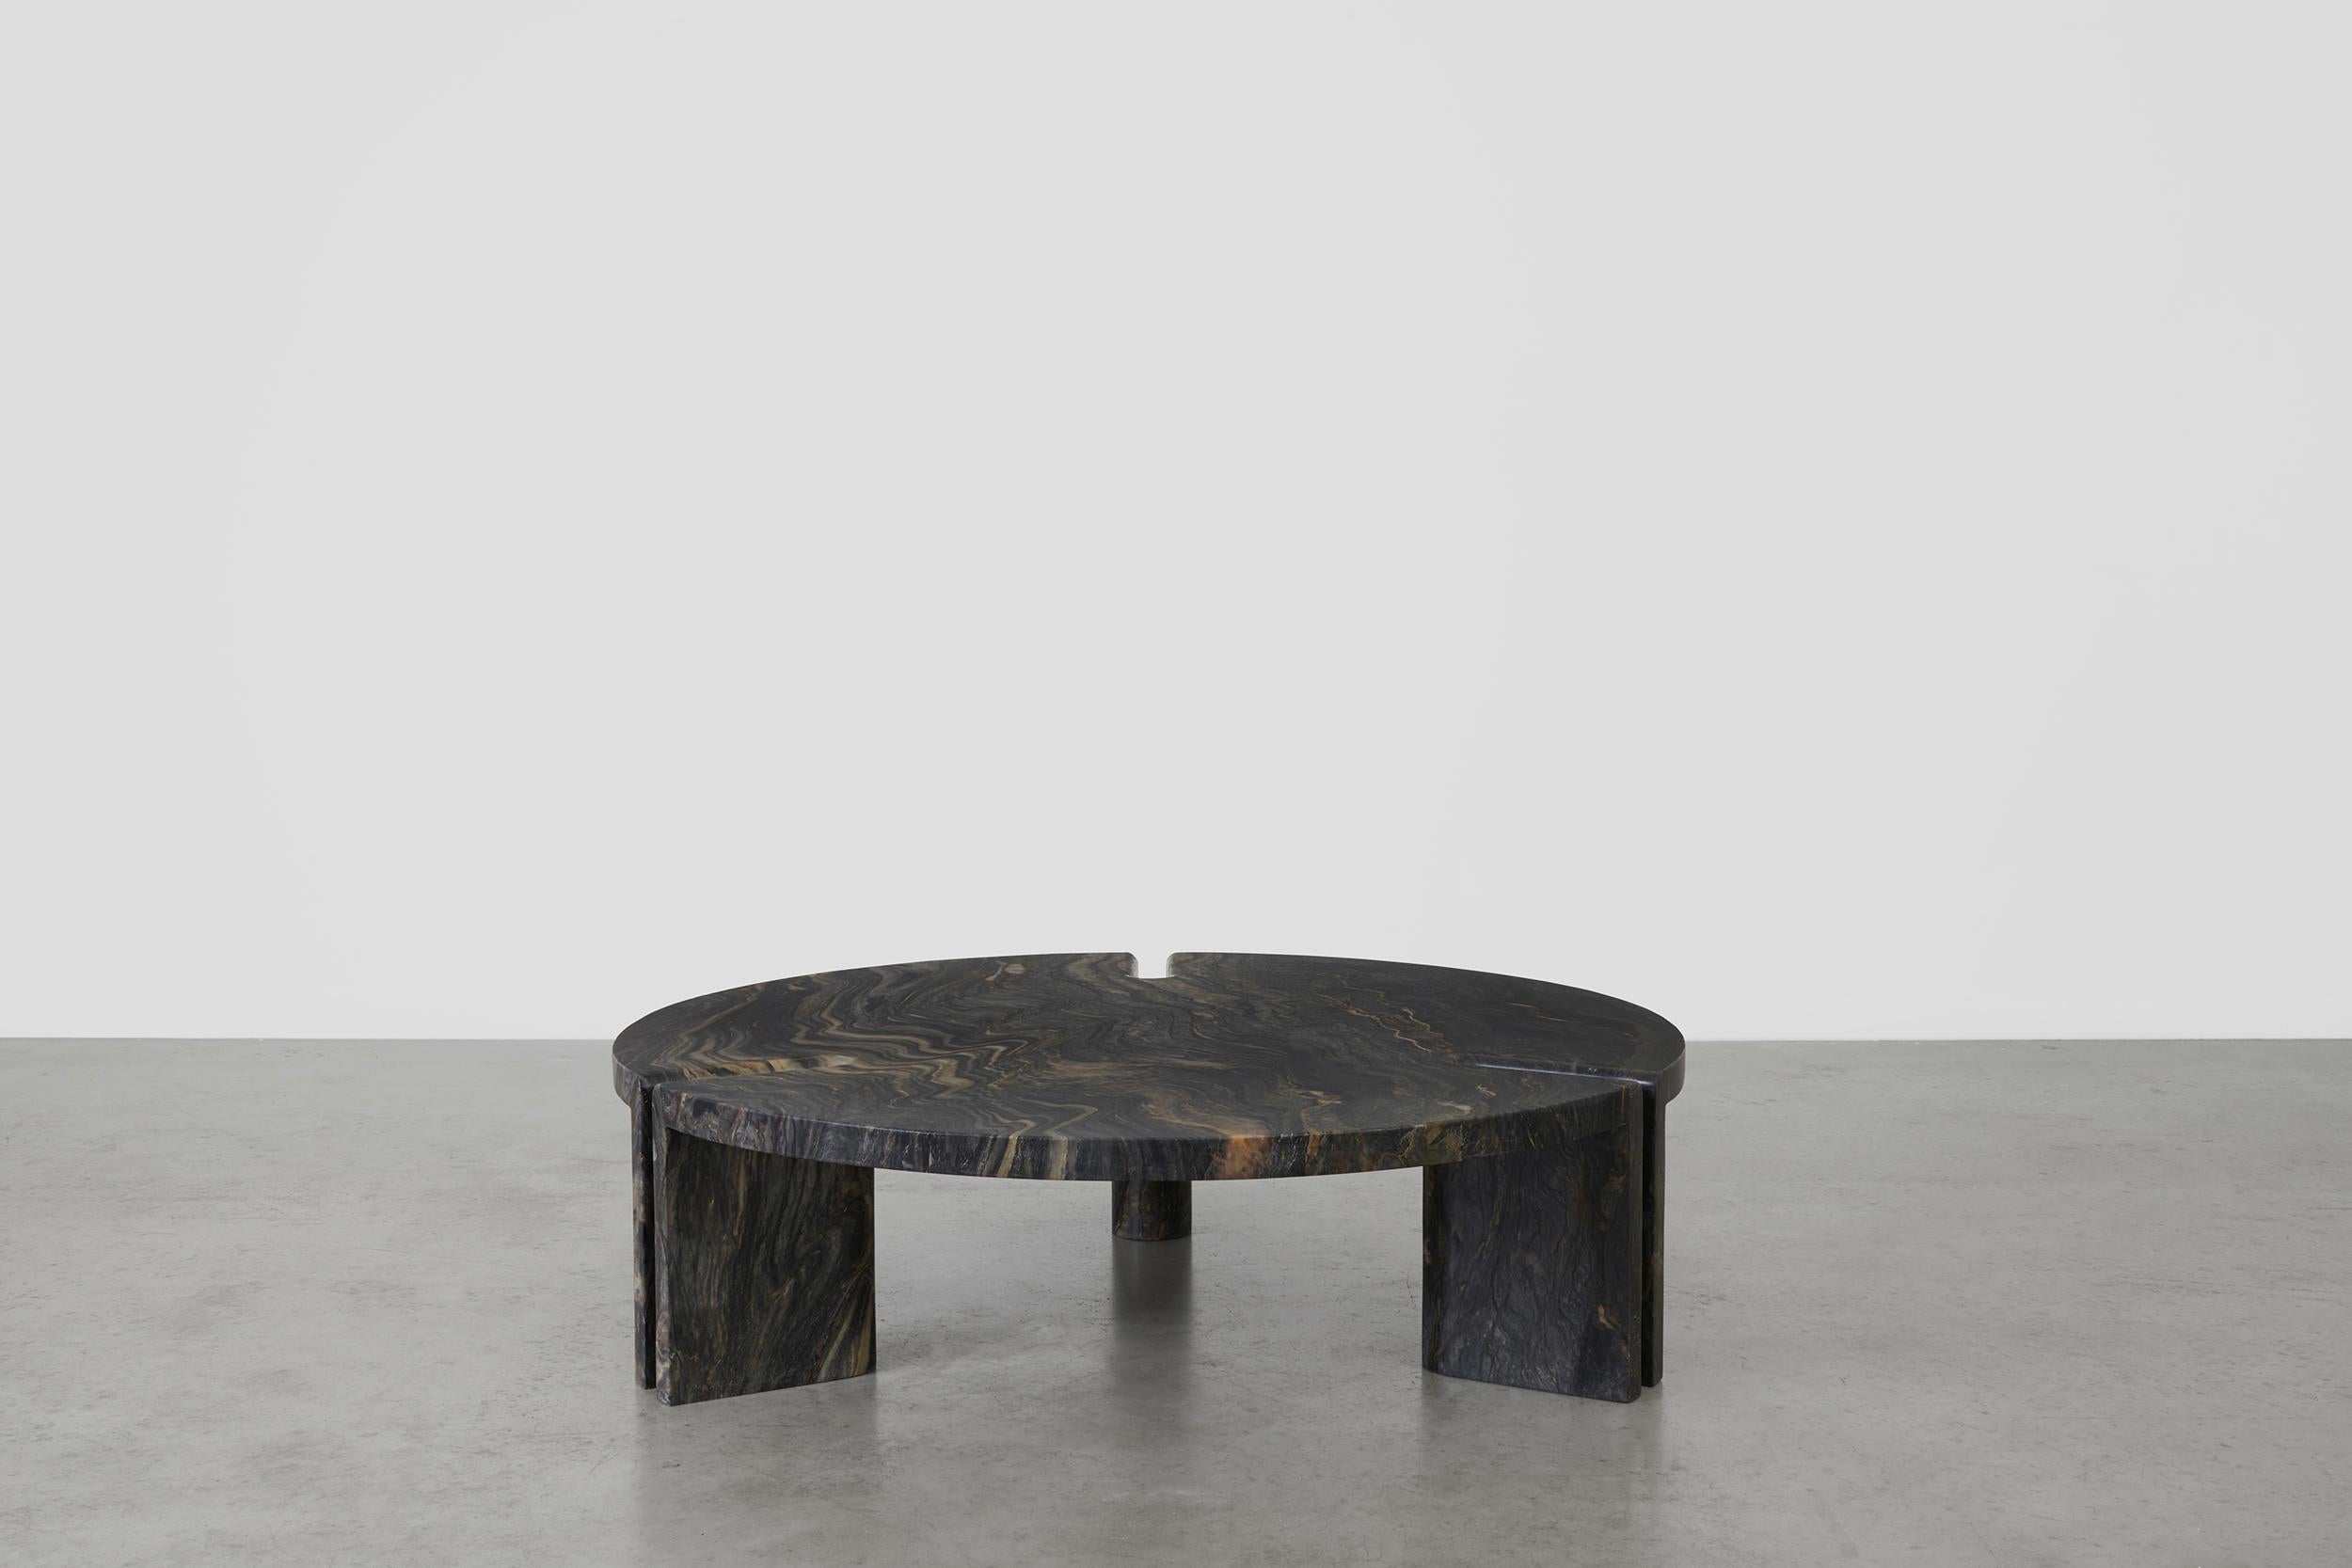 Marble Round Table by Agglomerati
Designed by Fred Ganim
Brazilian Quartzite, Edition 2 of 2 (2021)
Dimensions: D 117 x H 30 cm
Materials: Marble 
Made to order and priced individually per specified tabletop size and material.

Fred Ganim is